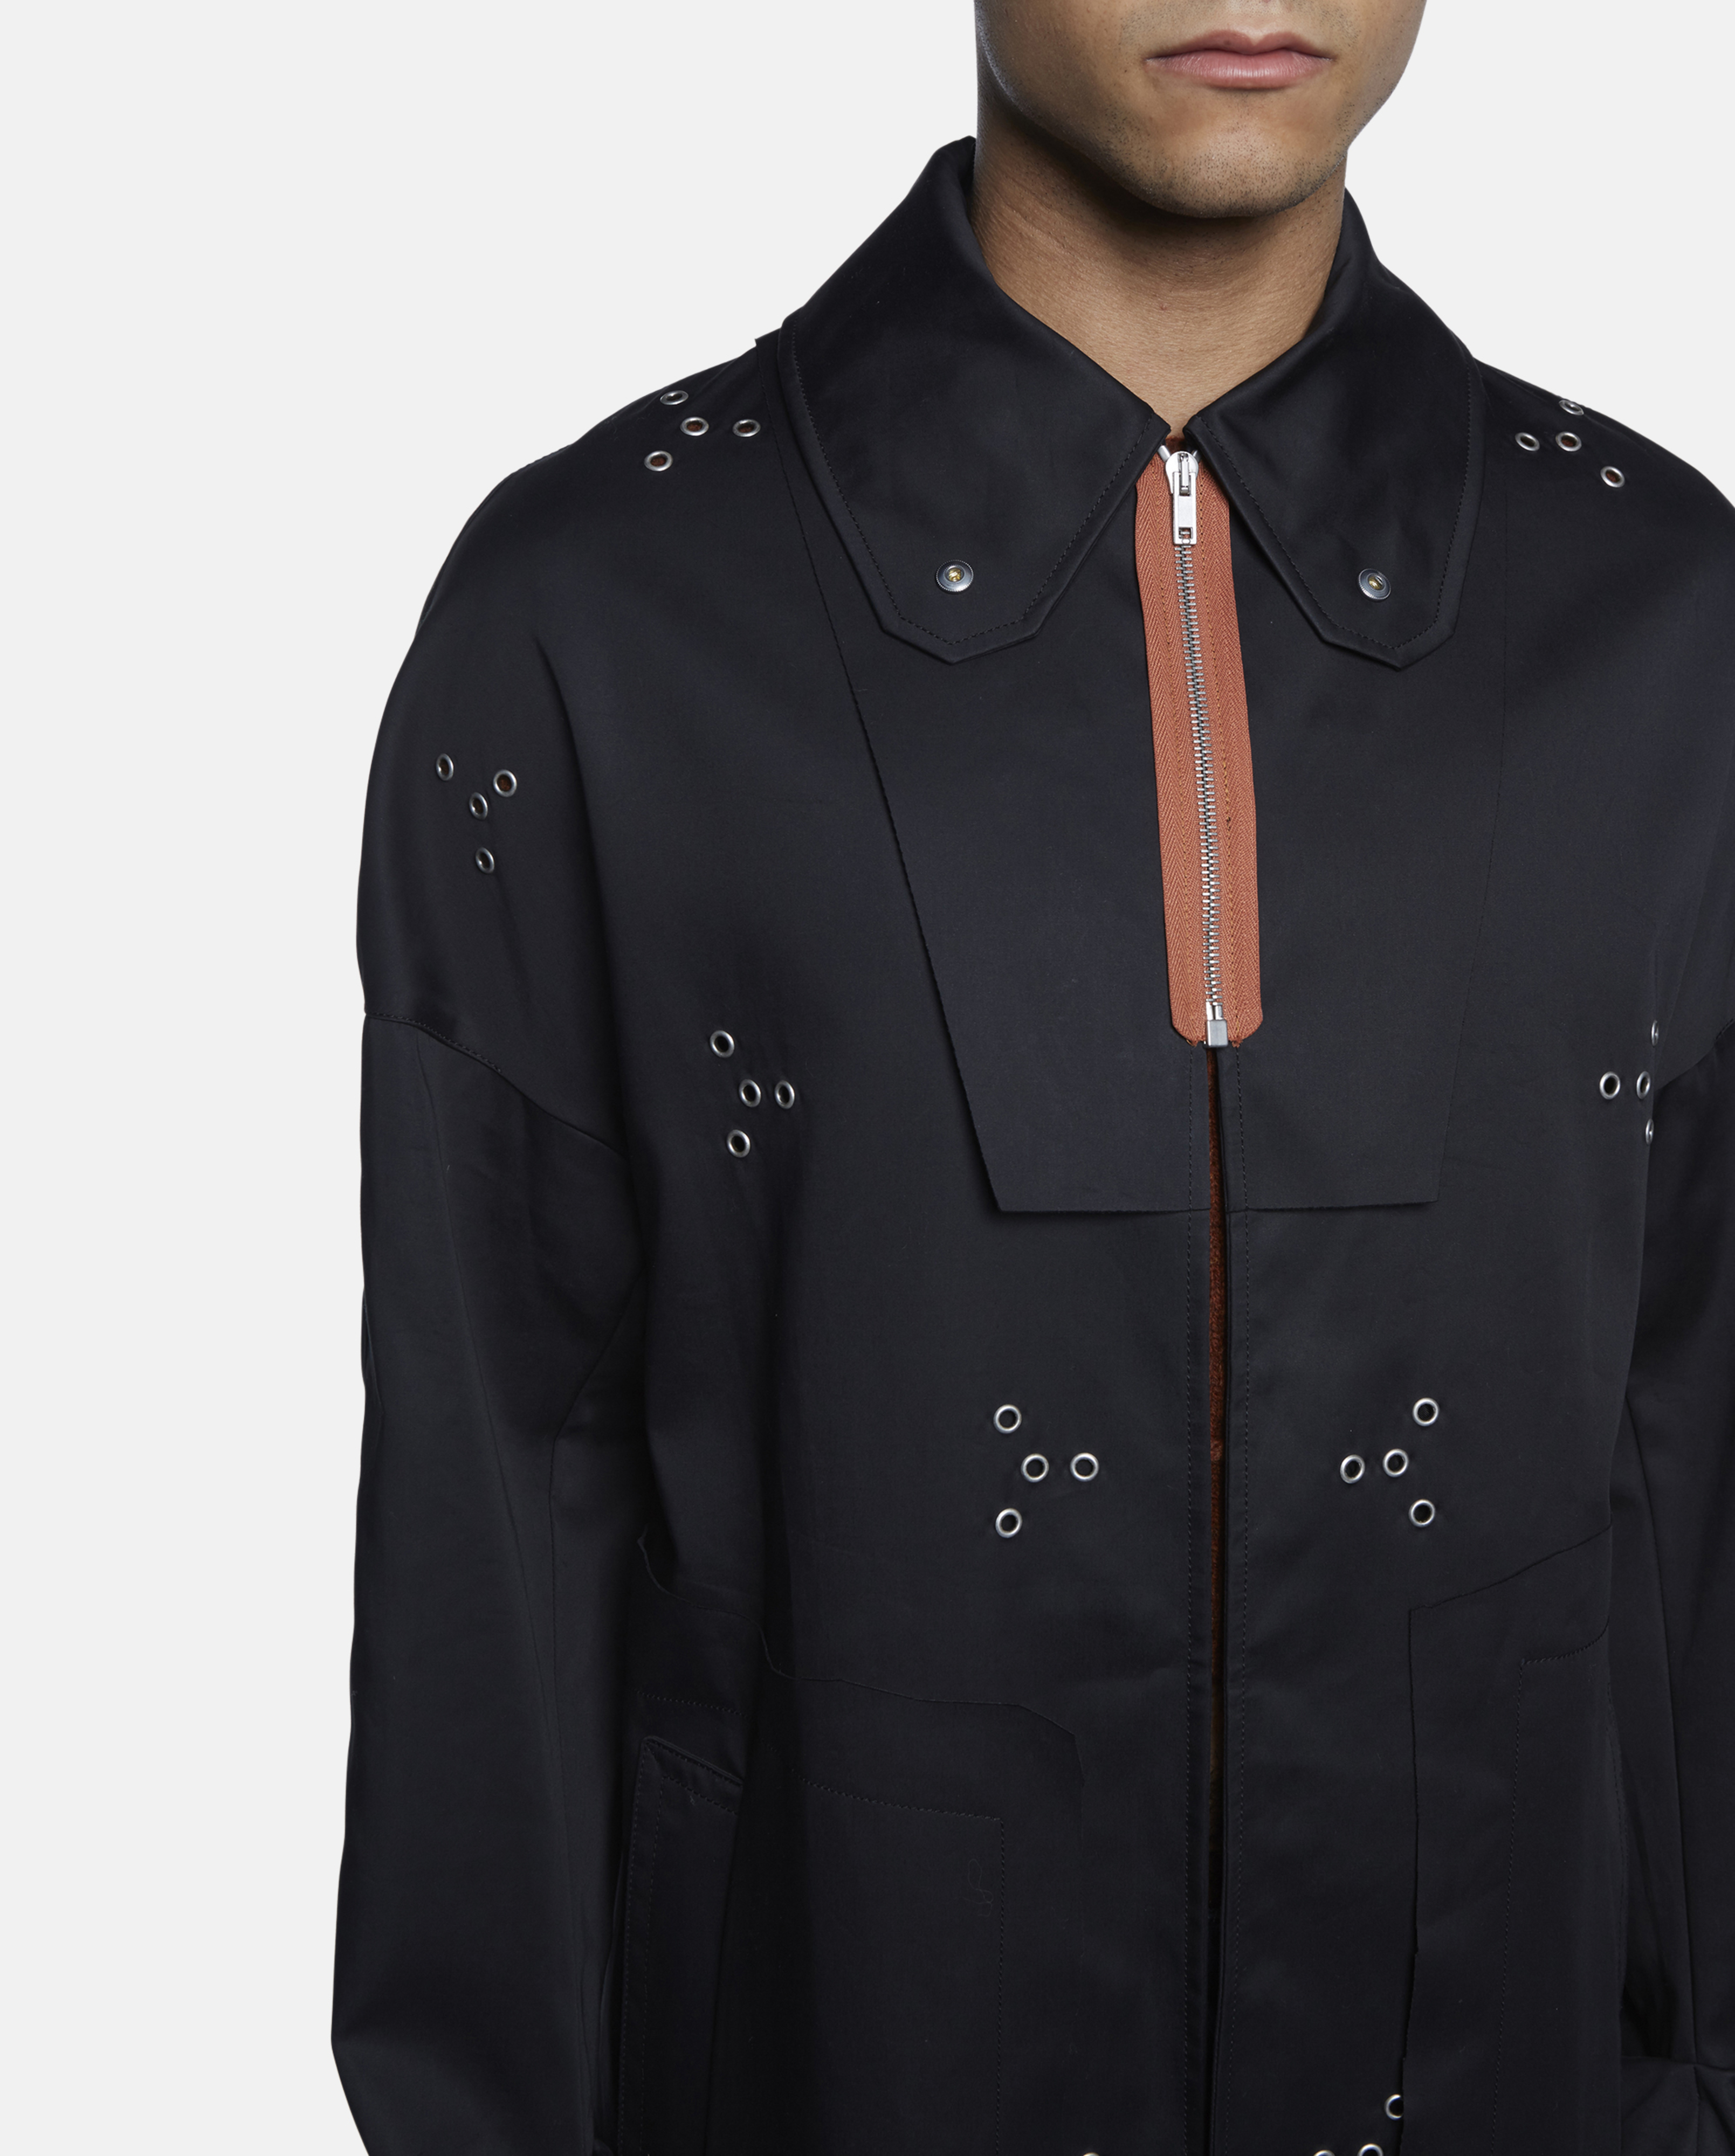 Lyst - Raf Simons Black Coat With All Over Eyelet in Black